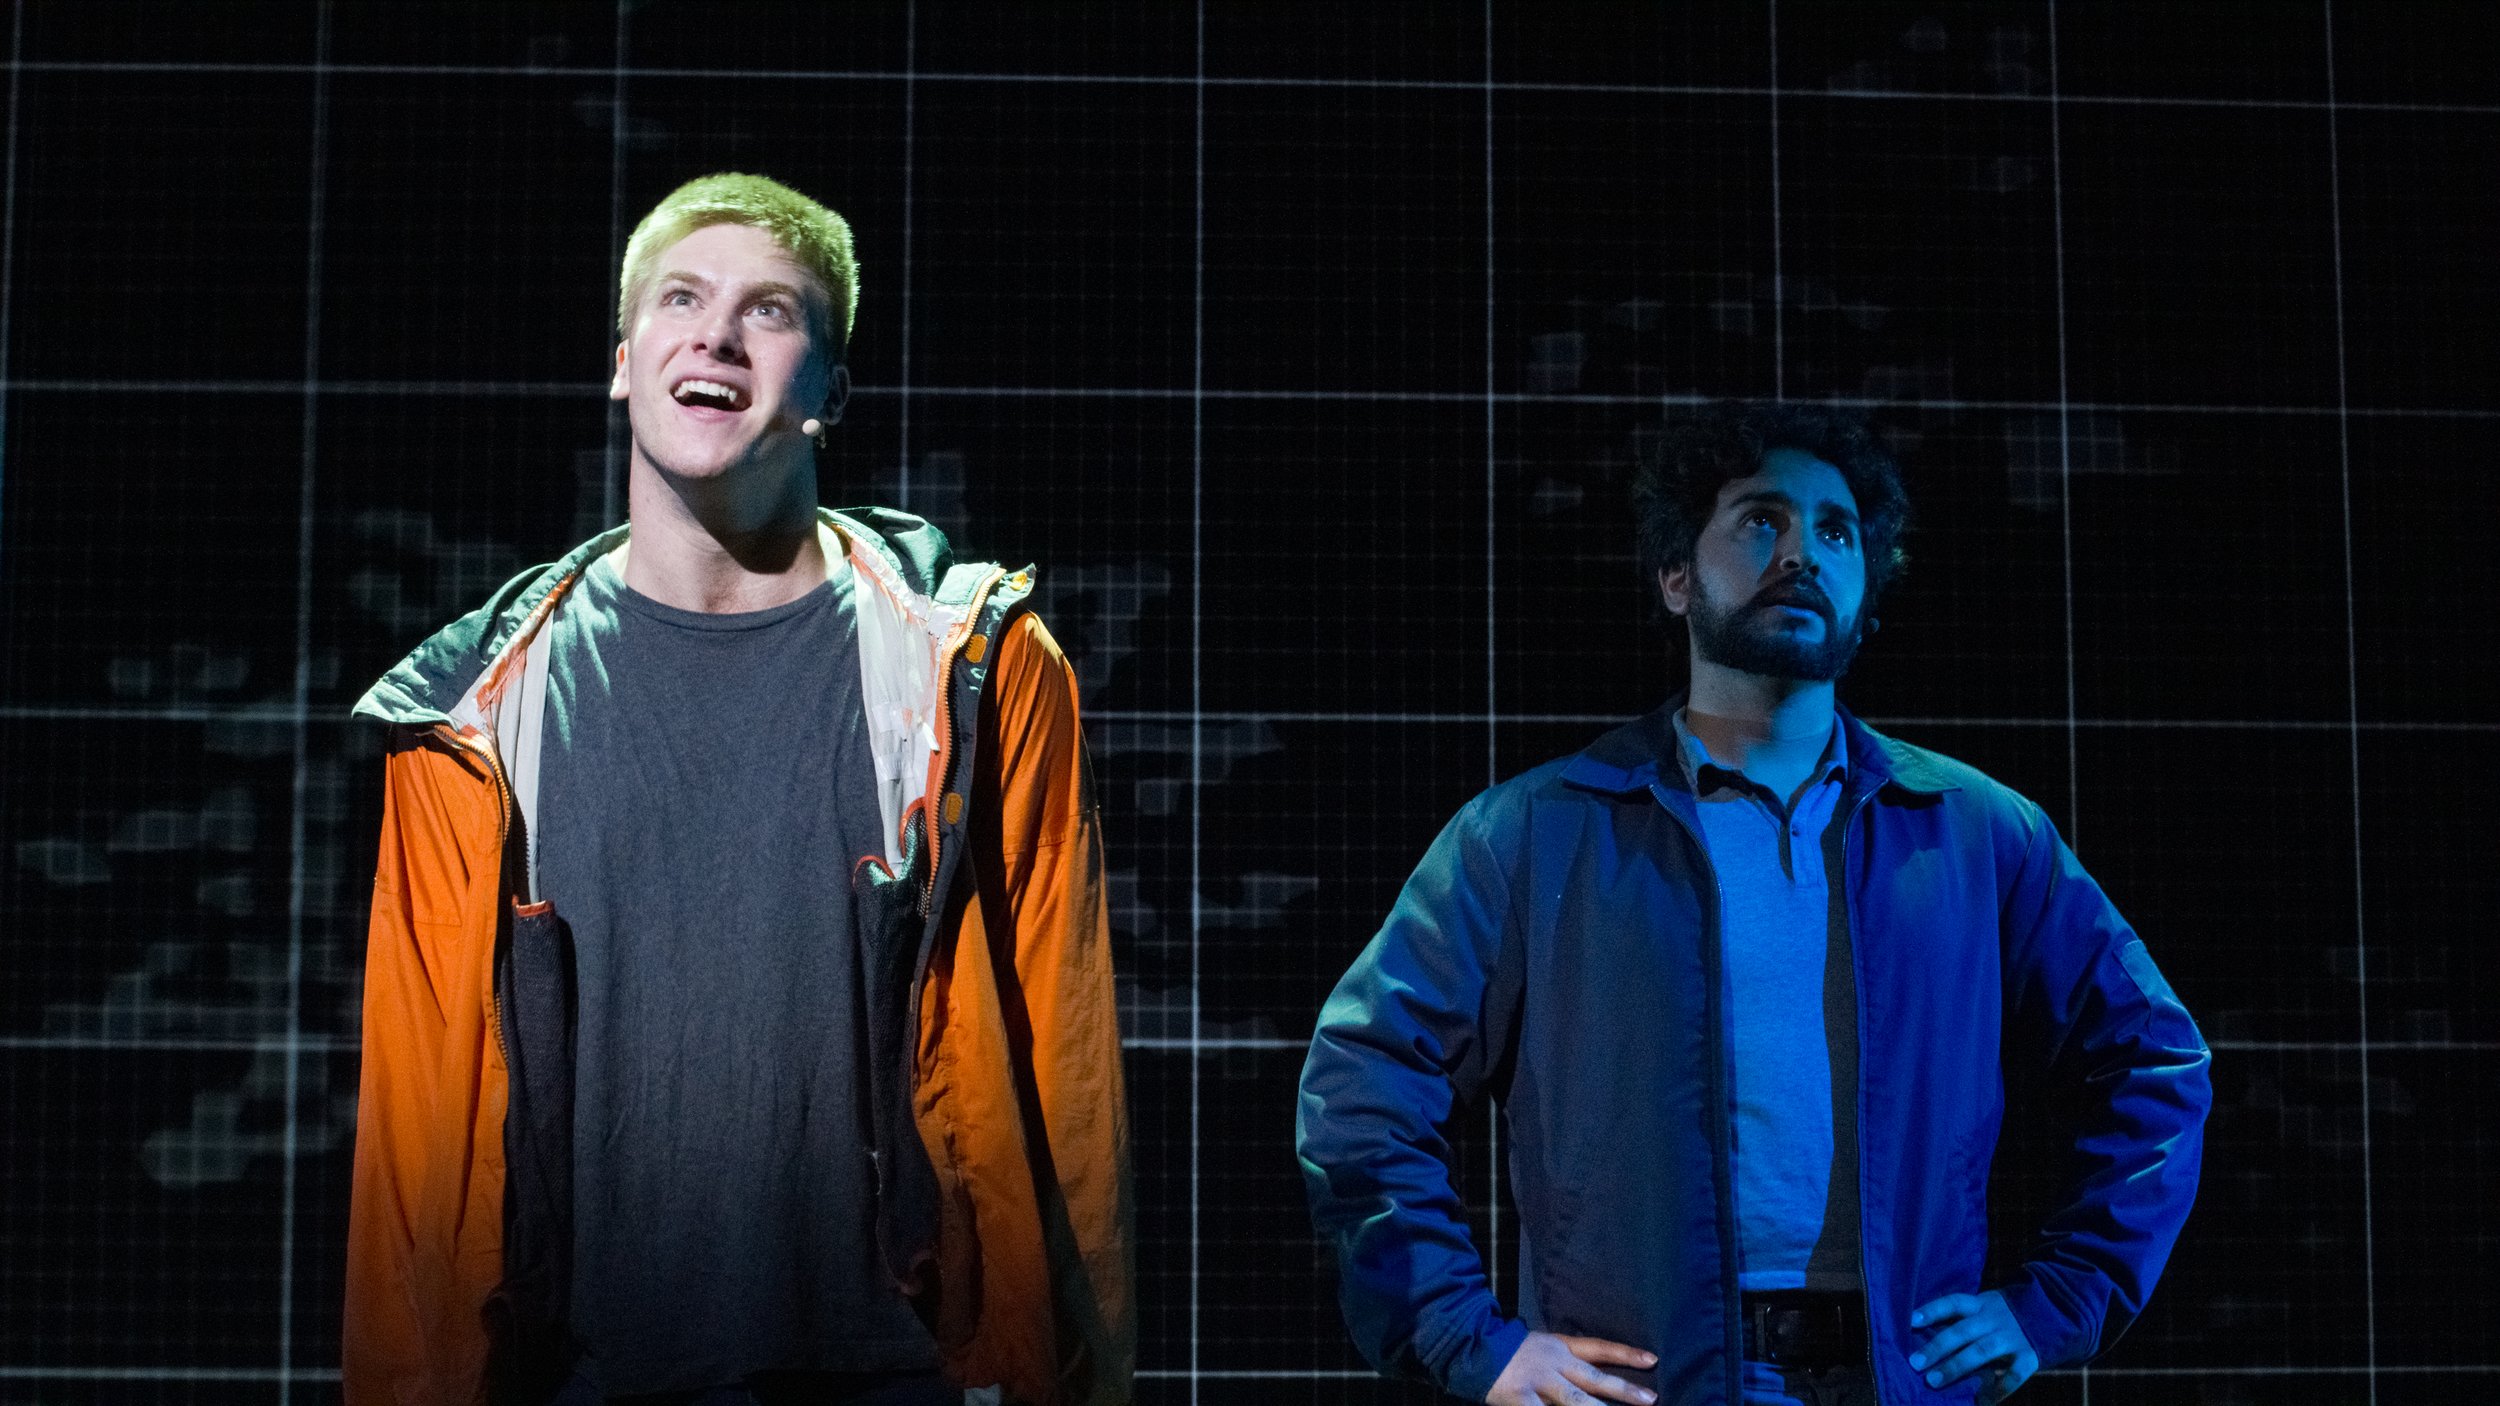  Justin Valine (left) and Tommy Abraham (right) during last dress rehearsal before the first showing of "The Curious Incident of The Dog in The Night-Time" on Thursday, October 7th at Santa Monica College, Santa Monica, Calif. 